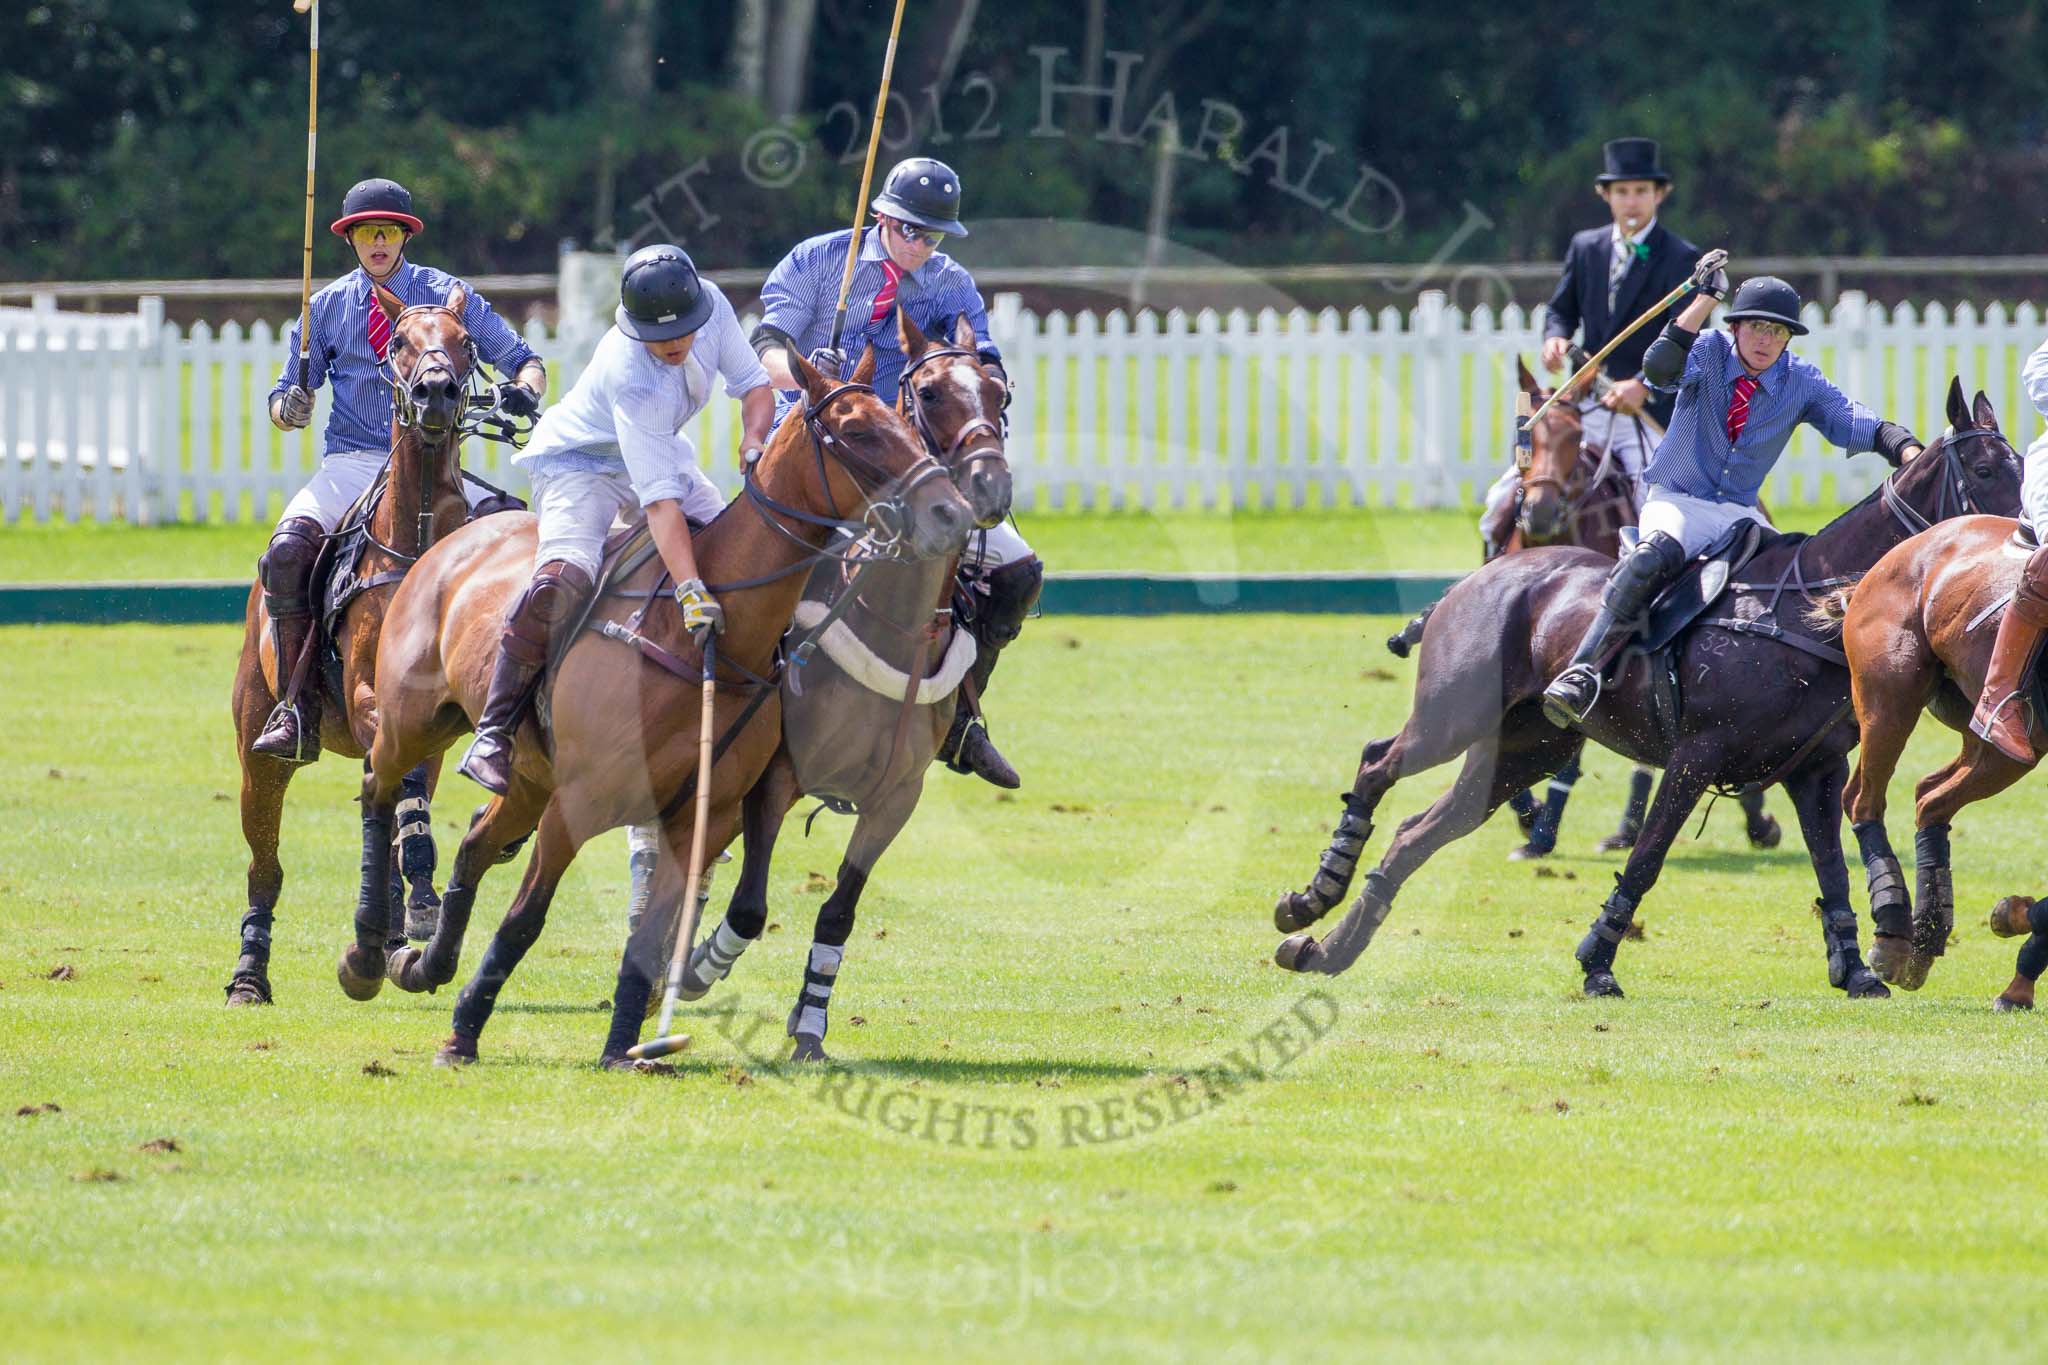 7th Heritage Polo Cup finals: Alex Vent in possession of the ball..
Hurtwood Park Polo Club,
Ewhurst Green,
Surrey,
United Kingdom,
on 05 August 2012 at 14:15, image #74